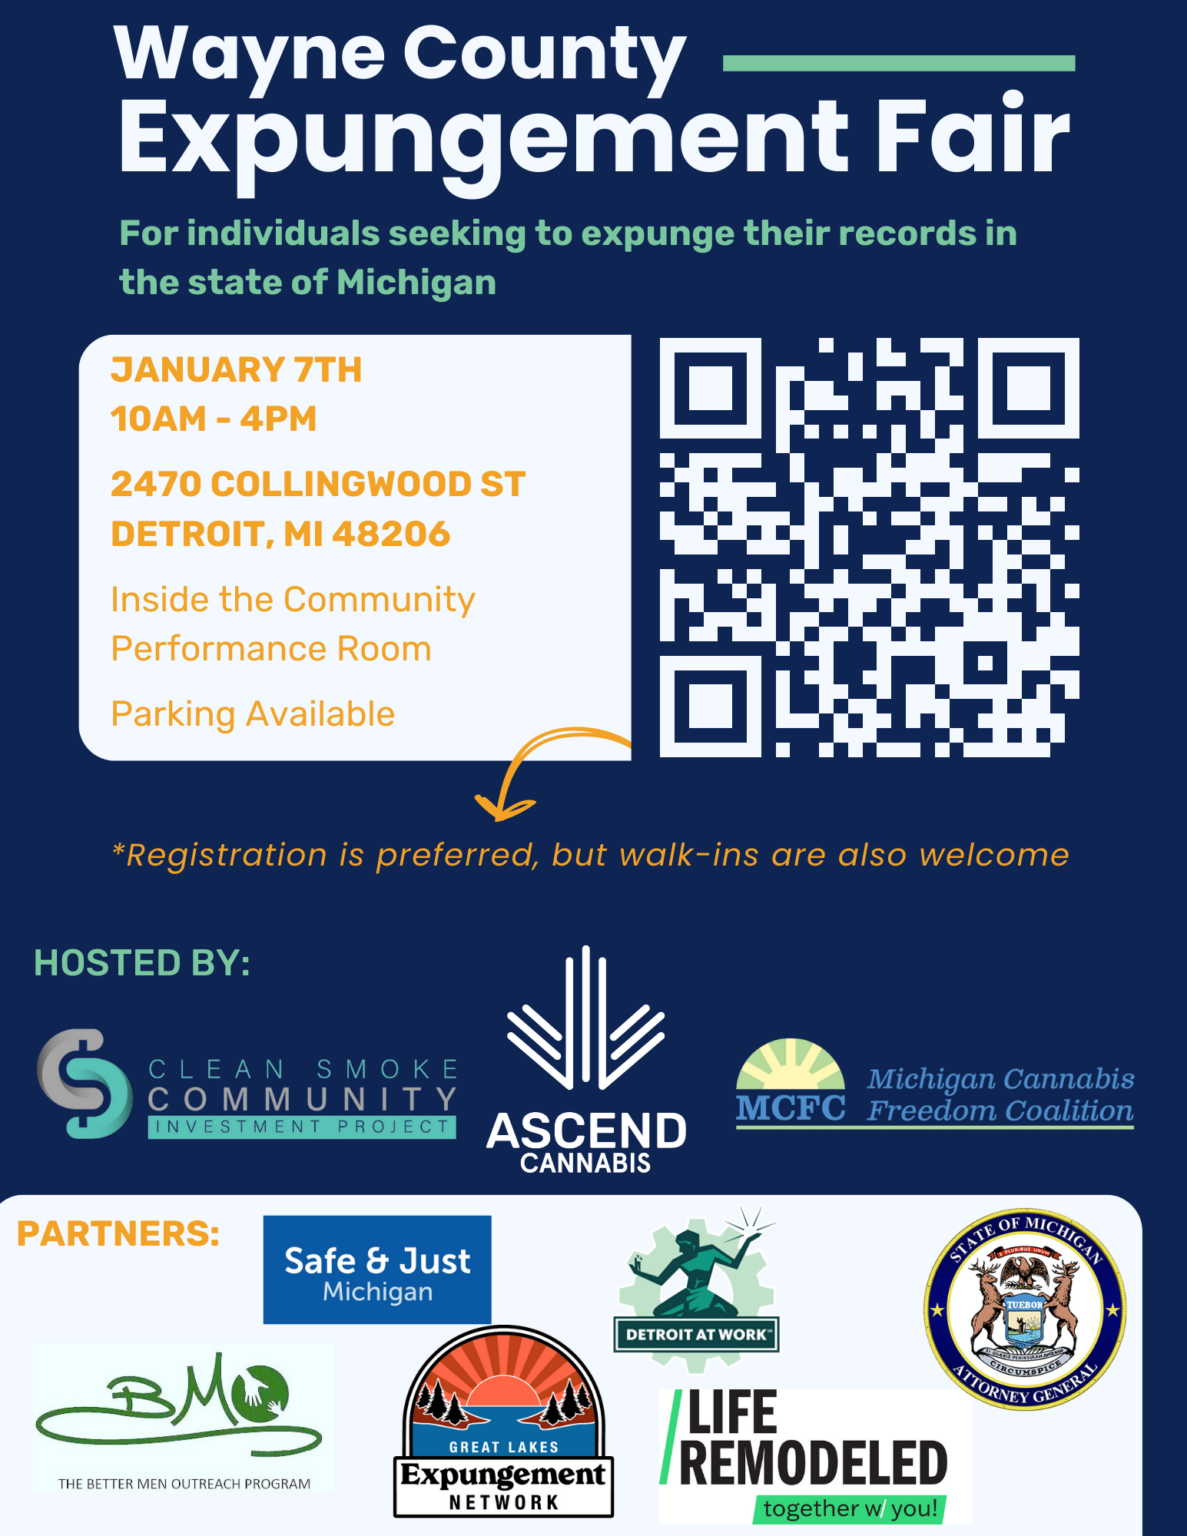 January 7th Expungement Fair in Detroit